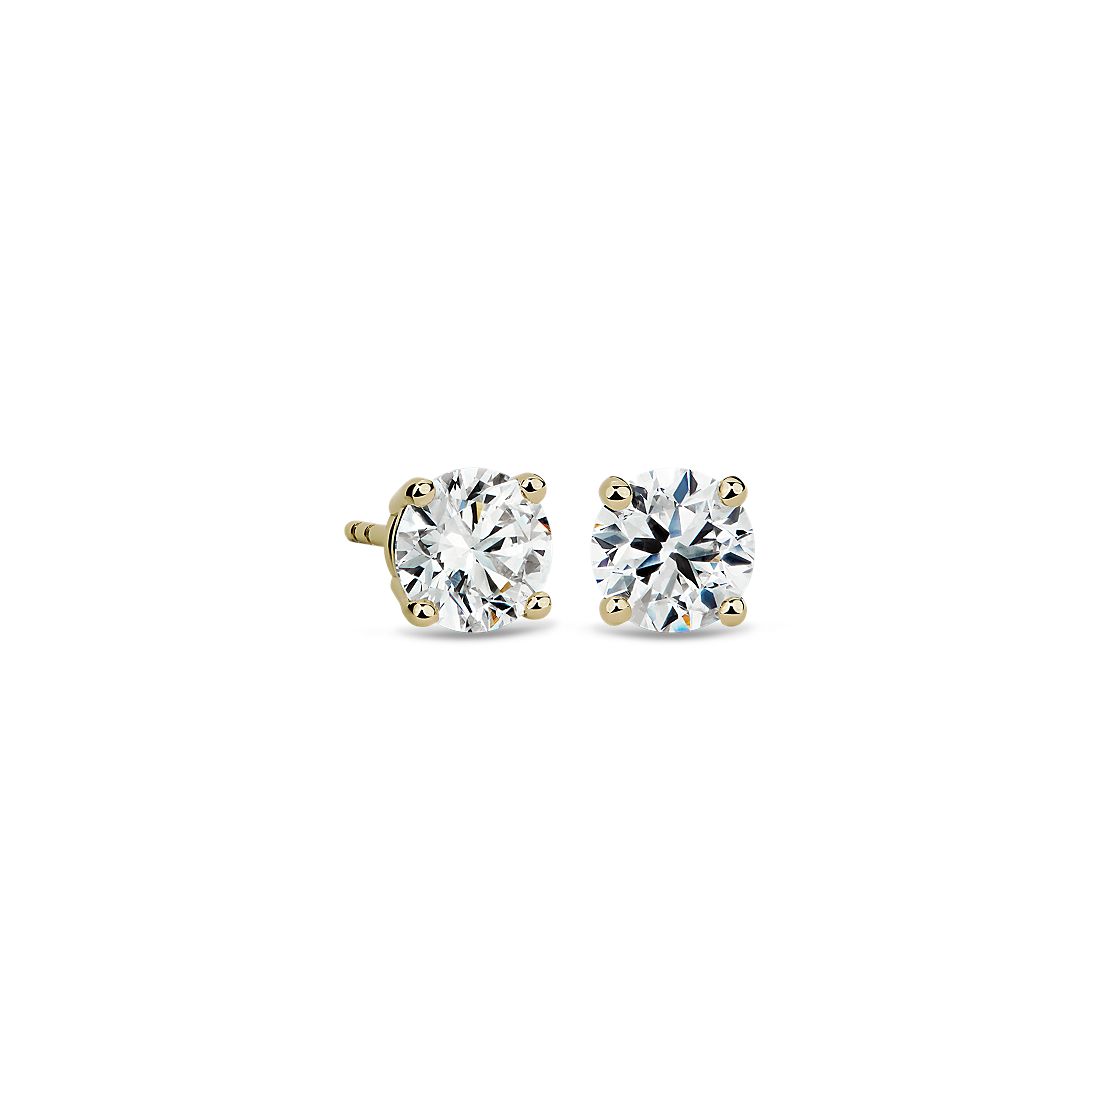 2mm Each Round Simulated Diamond Earring 14K Yellow Gold Stud Earring Aprx .10 Carat Total Weight Set on Stamping Setting & Friction Style Post 